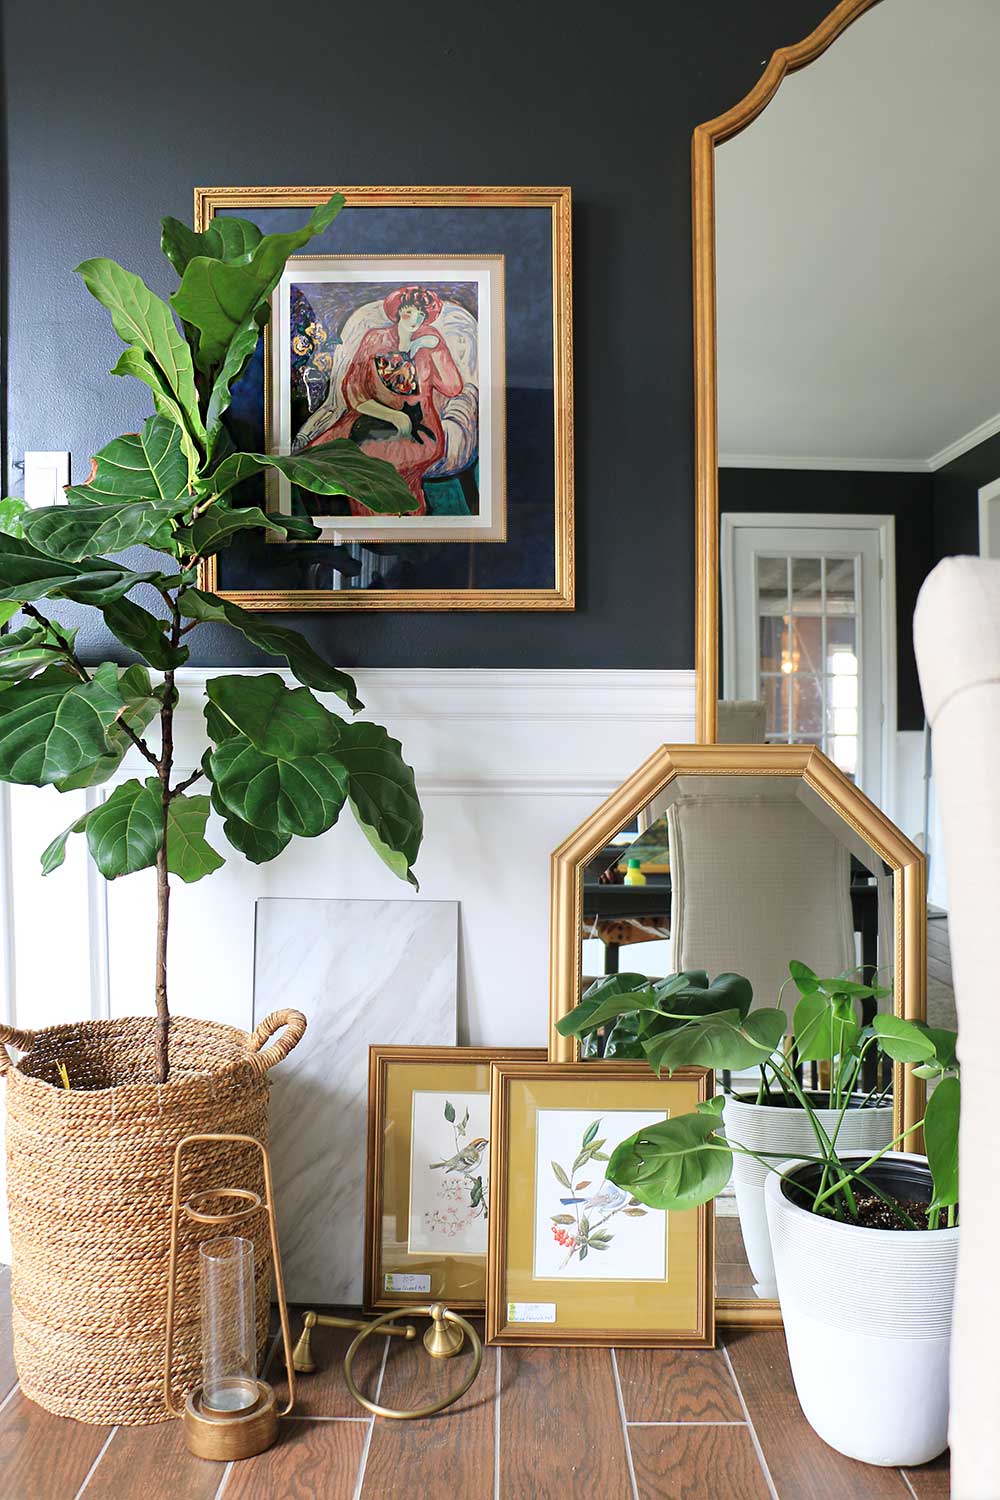 Picture-frame-mirror-and-plants